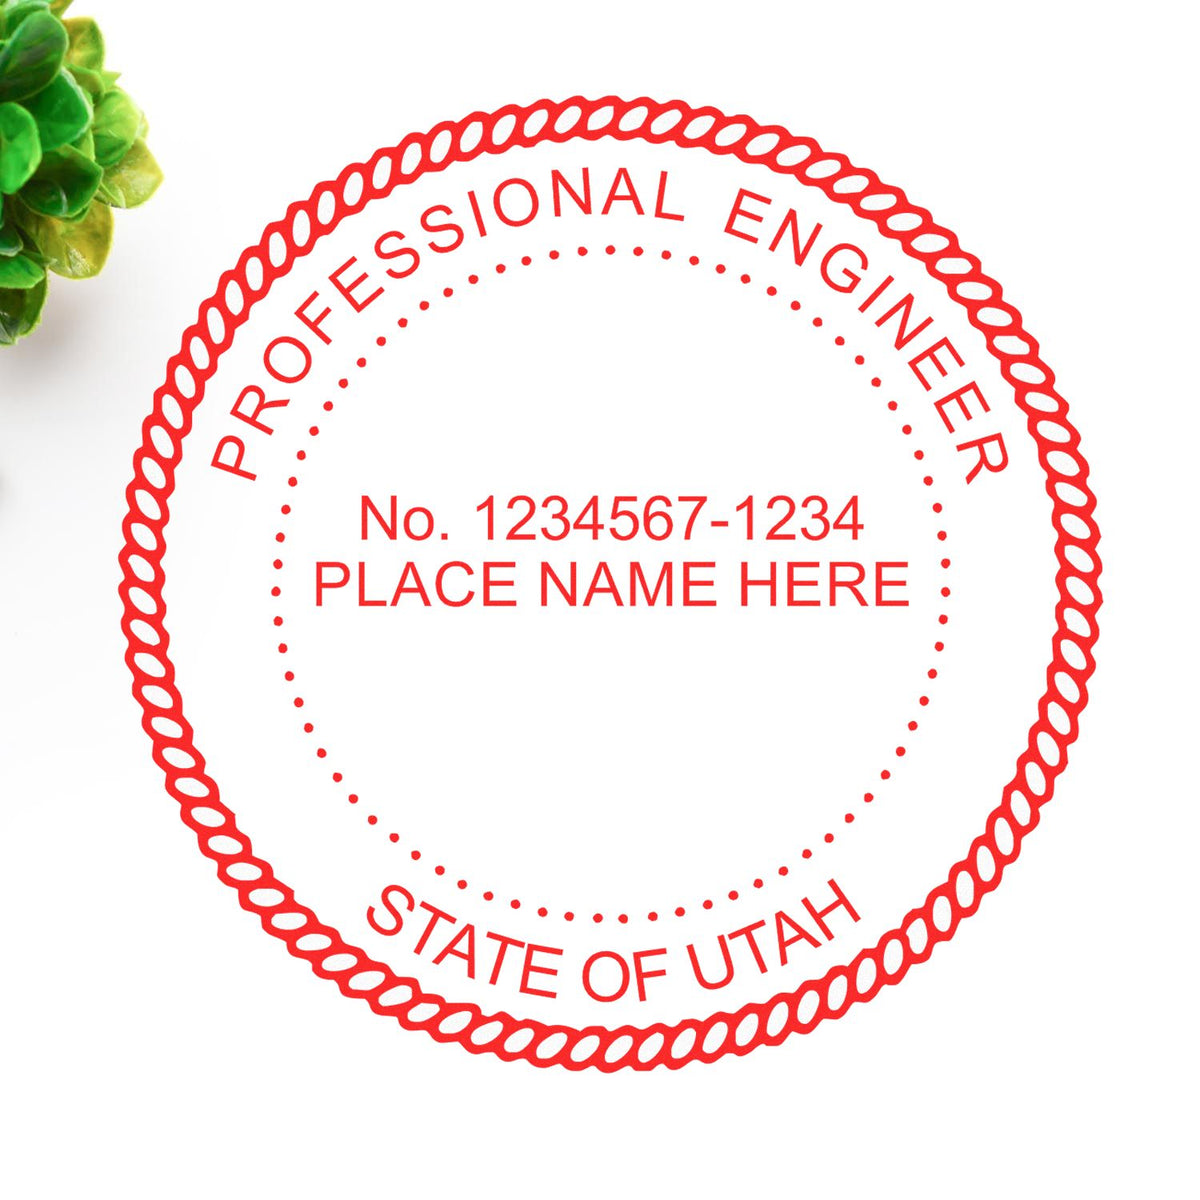 A lifestyle photo showing a stamped image of the Utah Professional Engineer Seal Stamp on a piece of paper